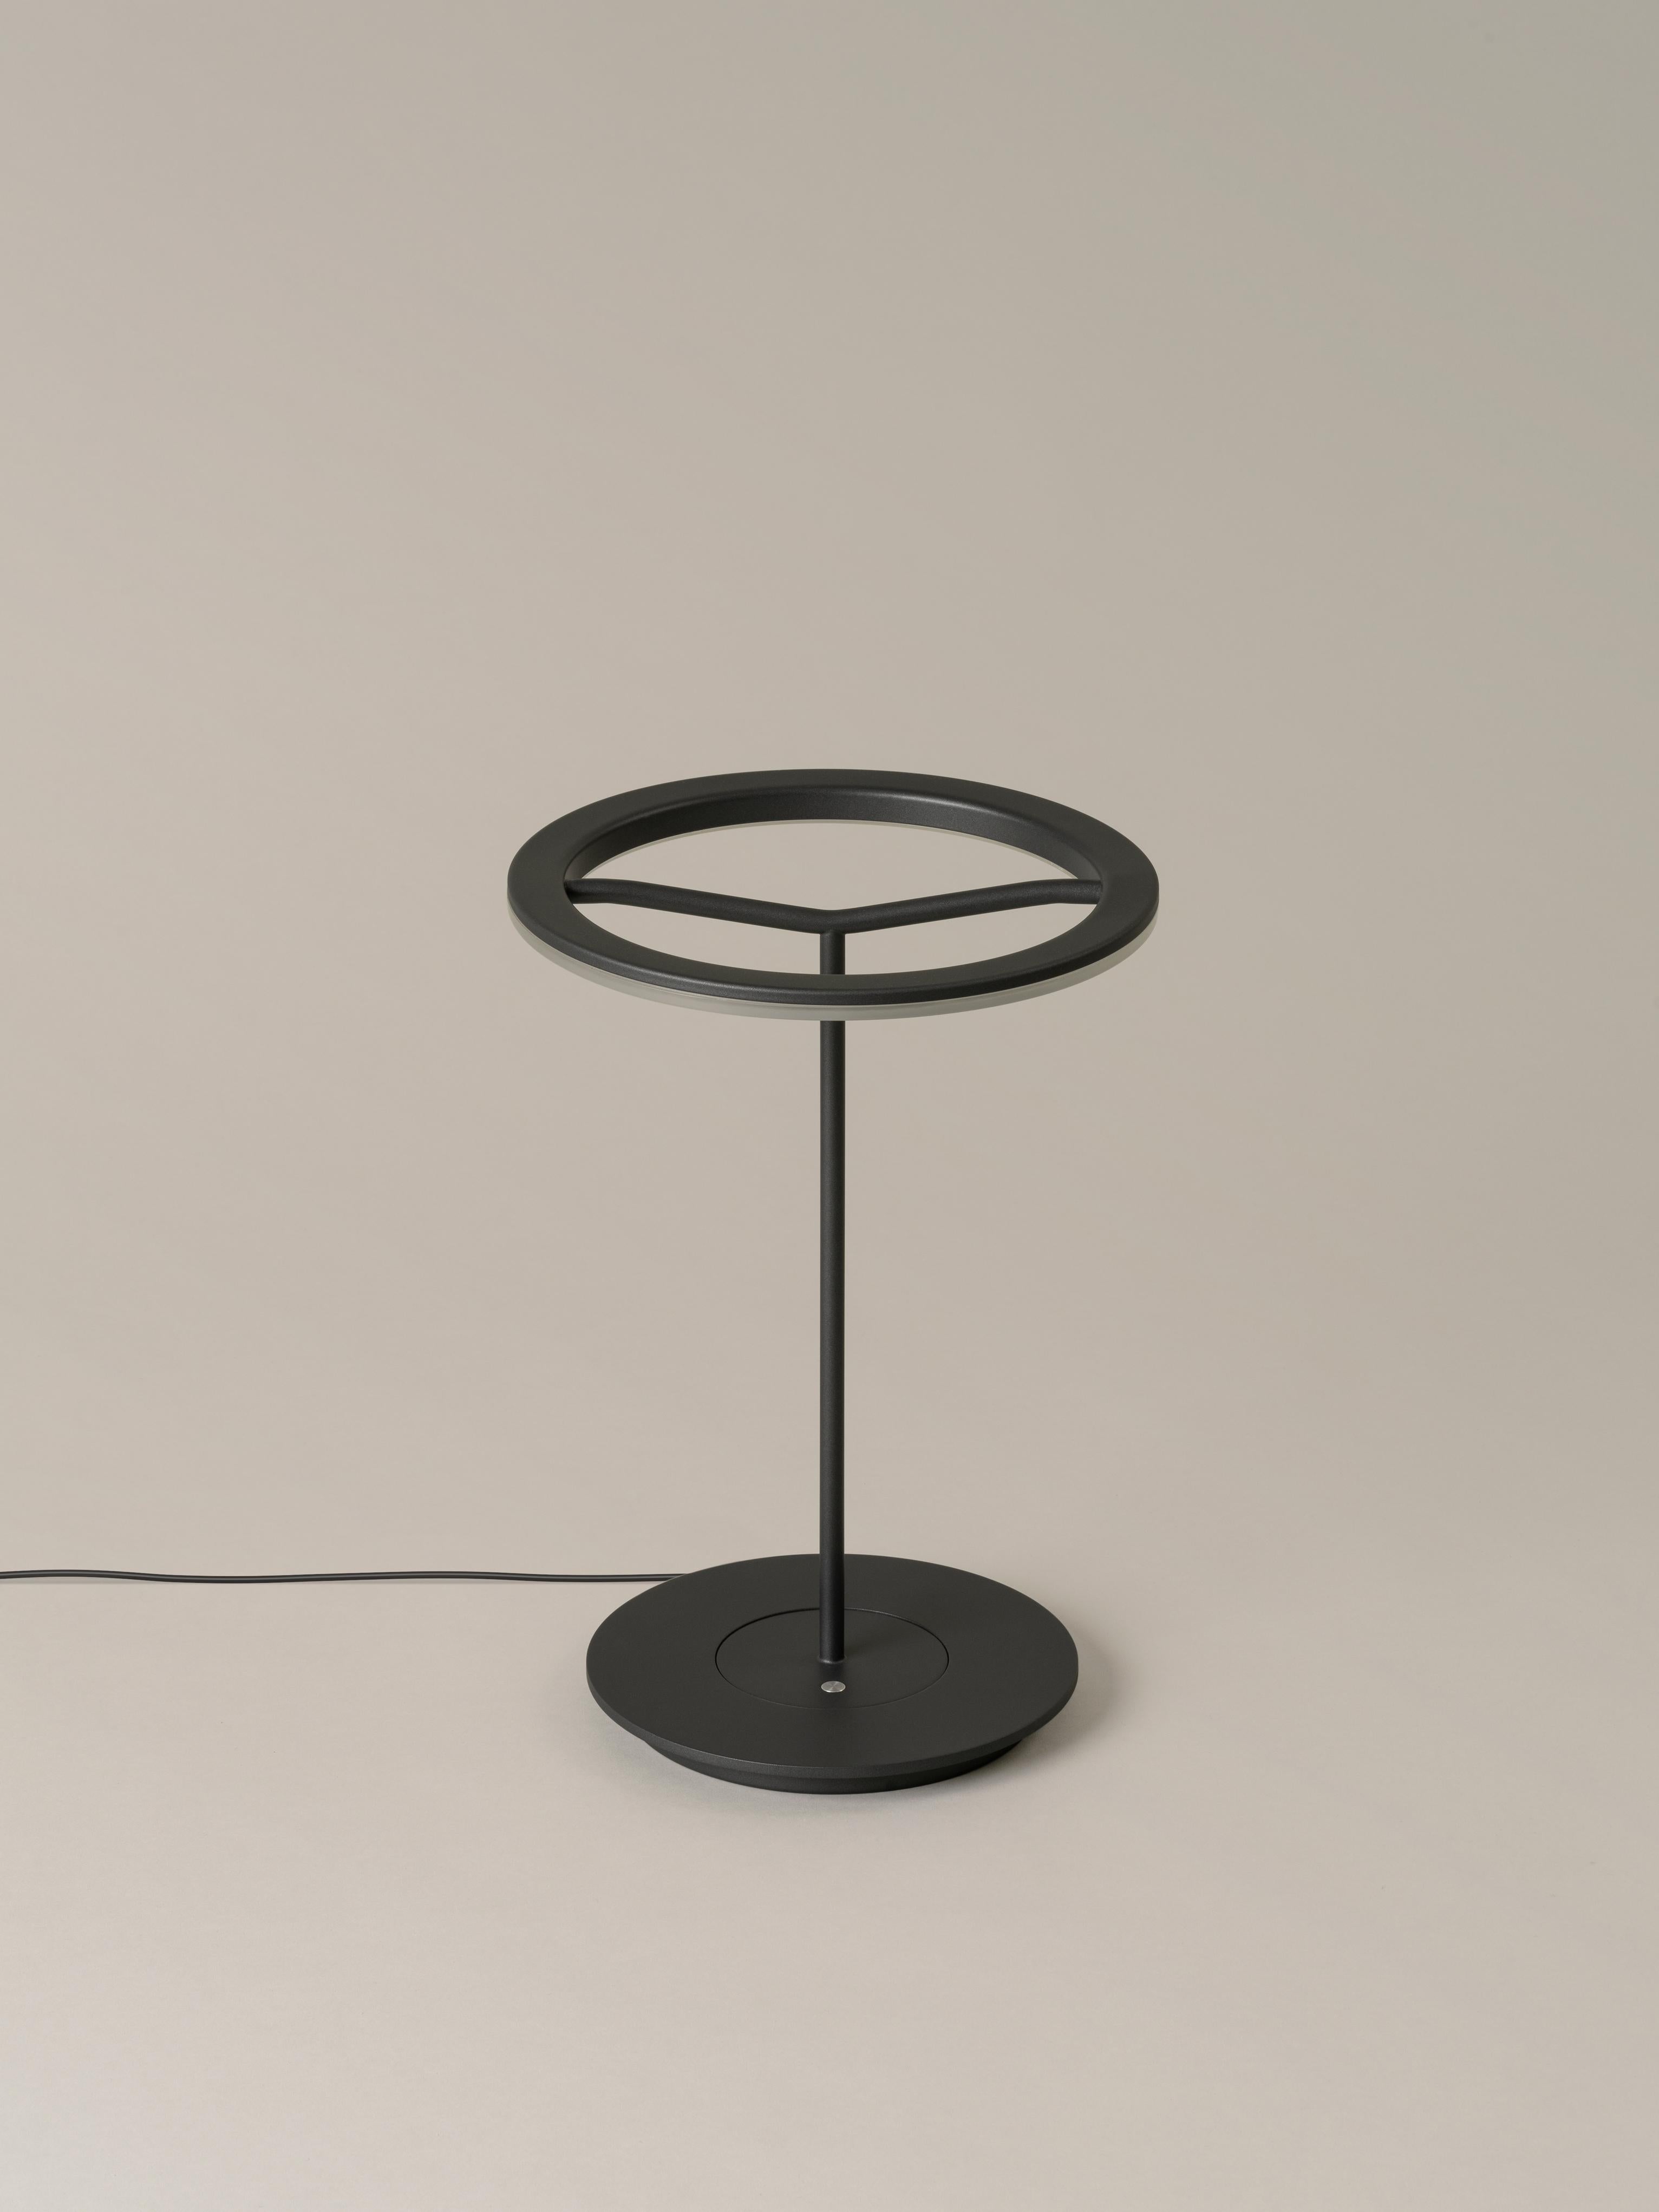 Small graphite sin table lamp by Antoni Arola
Dimensions: D 25 x H 36 cm.
Materials: Metal.
Available in white or graphite, with or without shade.

A lamp that combines simplicity and technology to create a lucent ring of light suspended in the